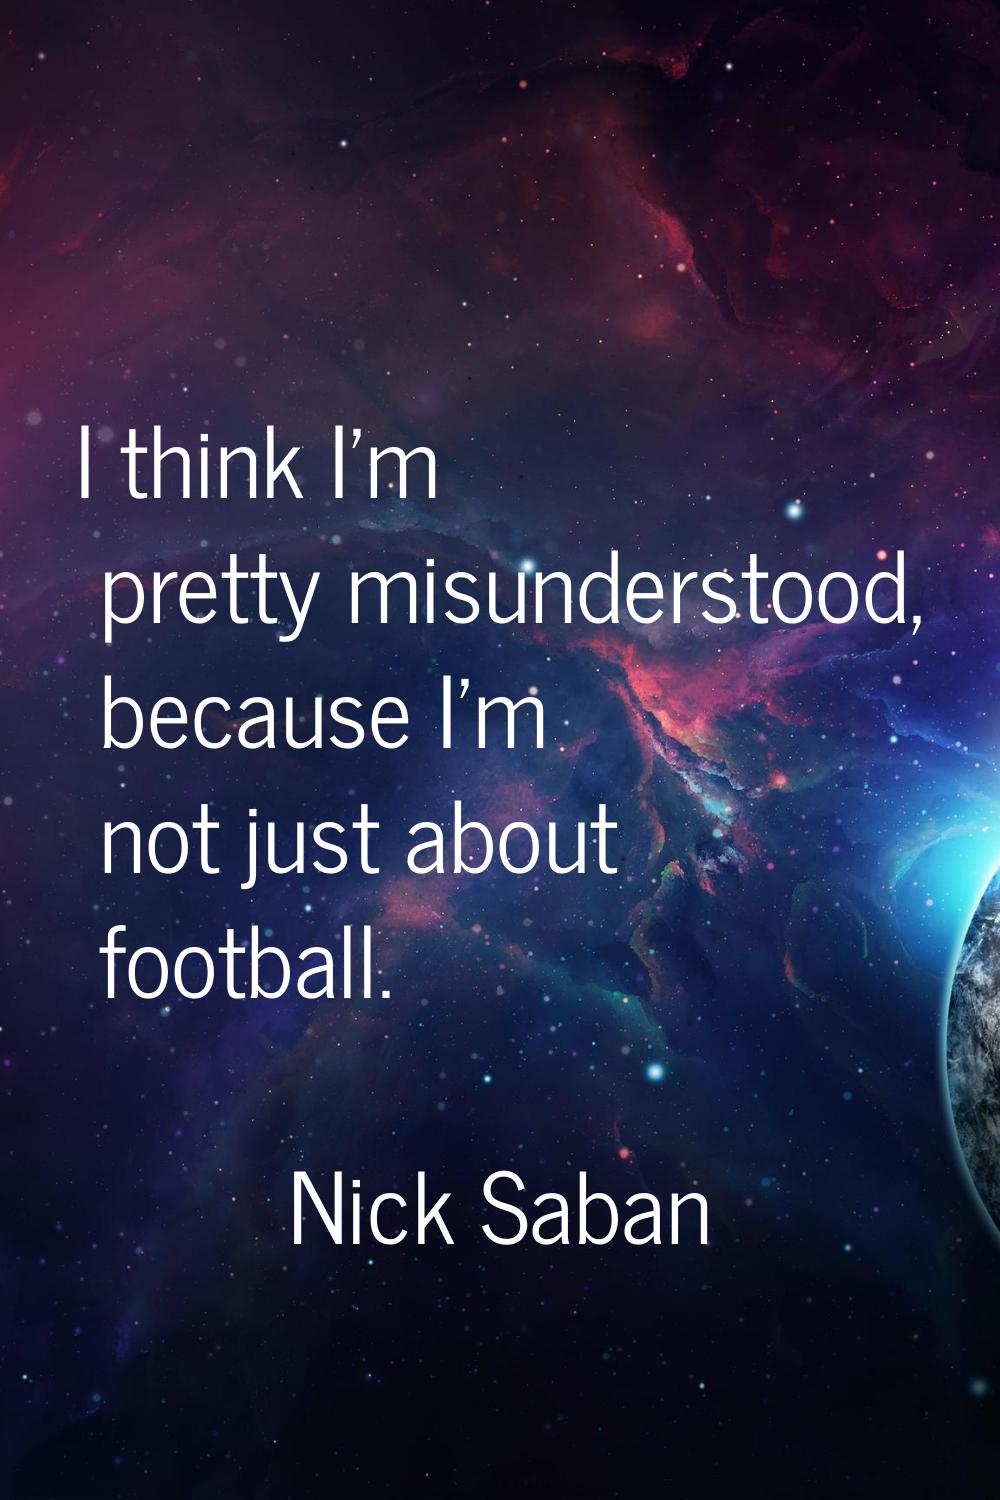 I think I'm pretty misunderstood, because I'm not just about football.